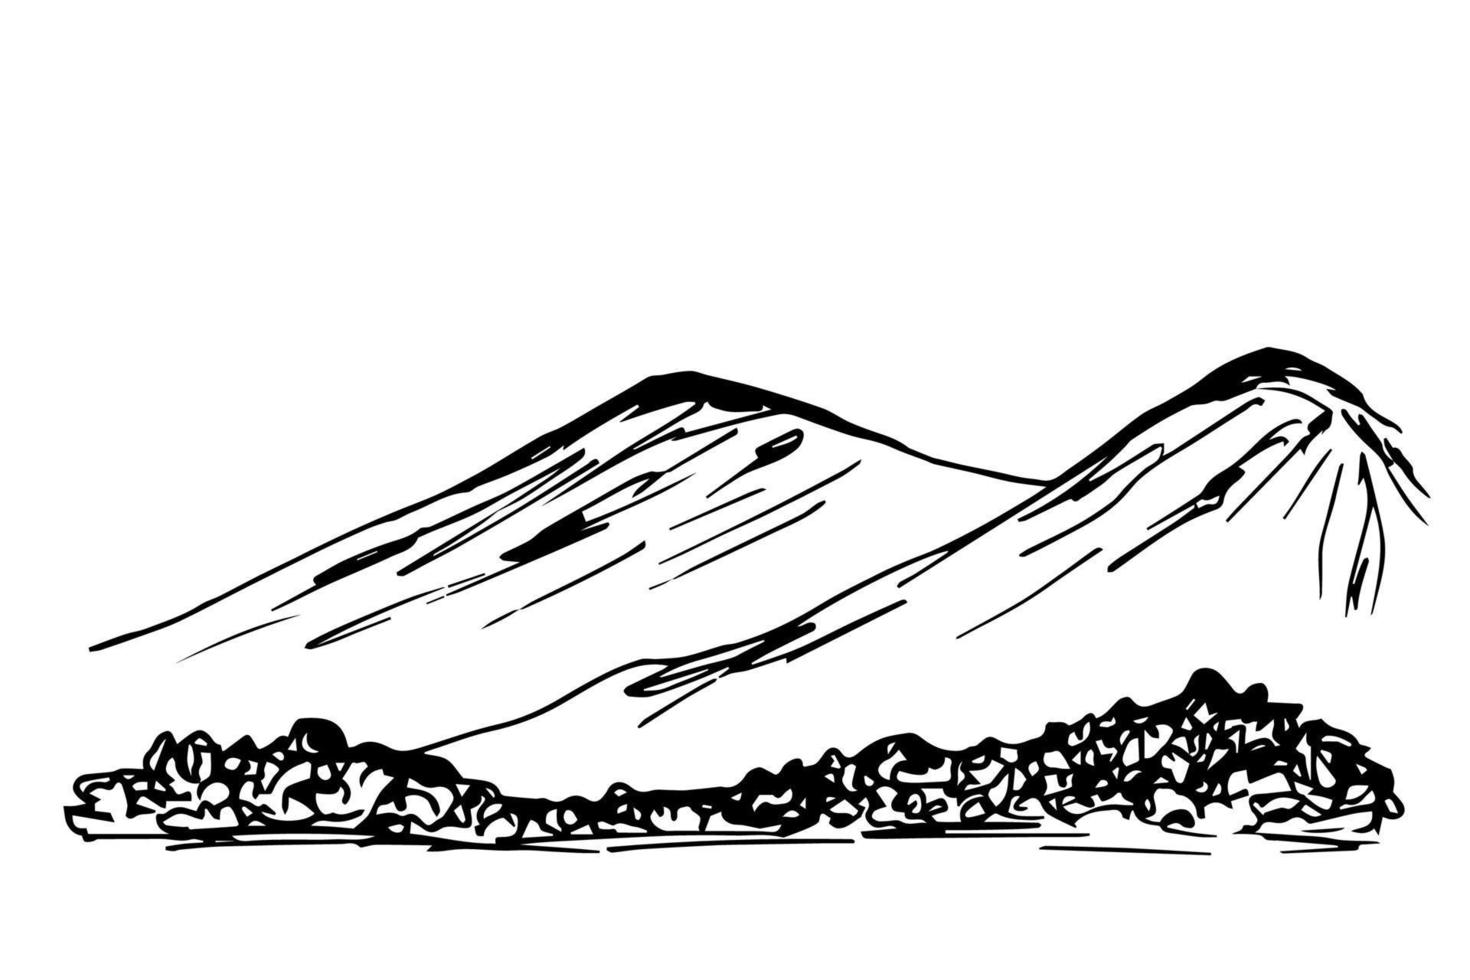 Hand-drawn simple vector landscape in black outline. Trees, bushes in the foreground, mountains on the horizon, hills. Wildlife, tourism, nature, travel.